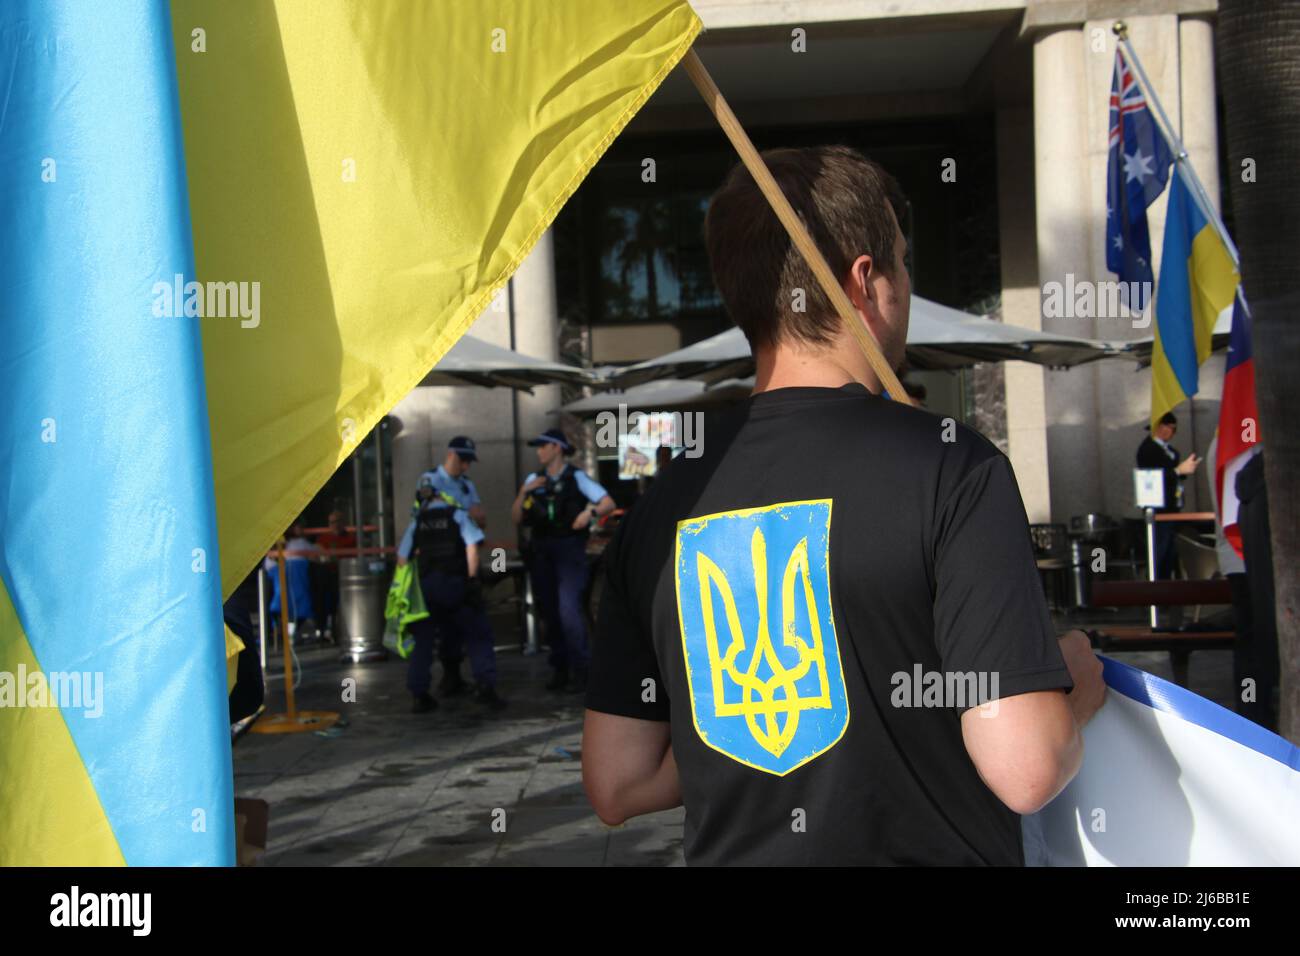 Sydney, Australia. 30th April 2022. Weekly walking rally from Martin Place to Circular Quay to raise awareness about the war in Ukraine and show support for Ukraine. Pictured: The Ukrainian coat of arms on a man's t-shirt. Credit: Richard Milnes/Alamy Live News Stock Photo